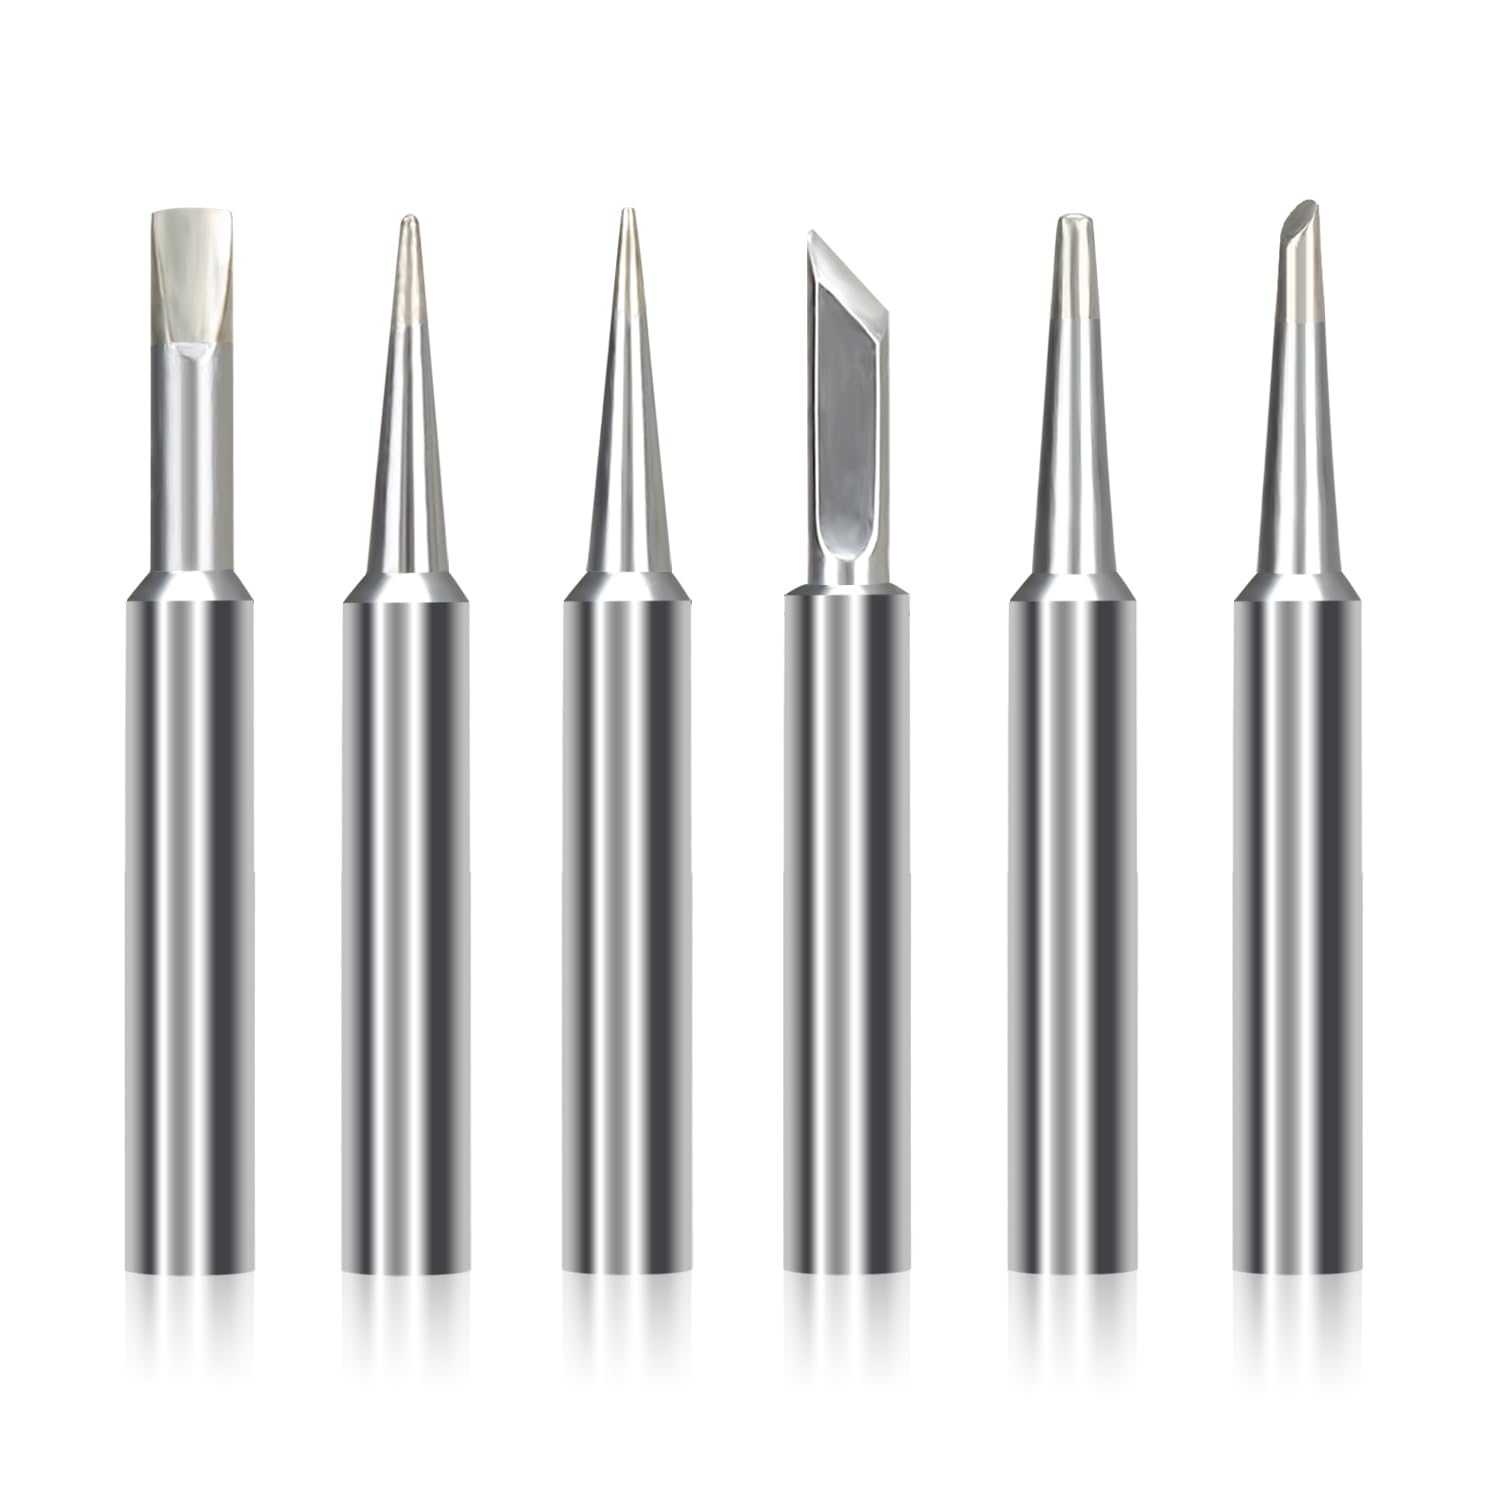 6PCS Soldering Tips for Weller ST Series Tip Replace Weller ST7 WLC100,SP40L / SP40N and WP25, WP30, WP35 Irons Tips